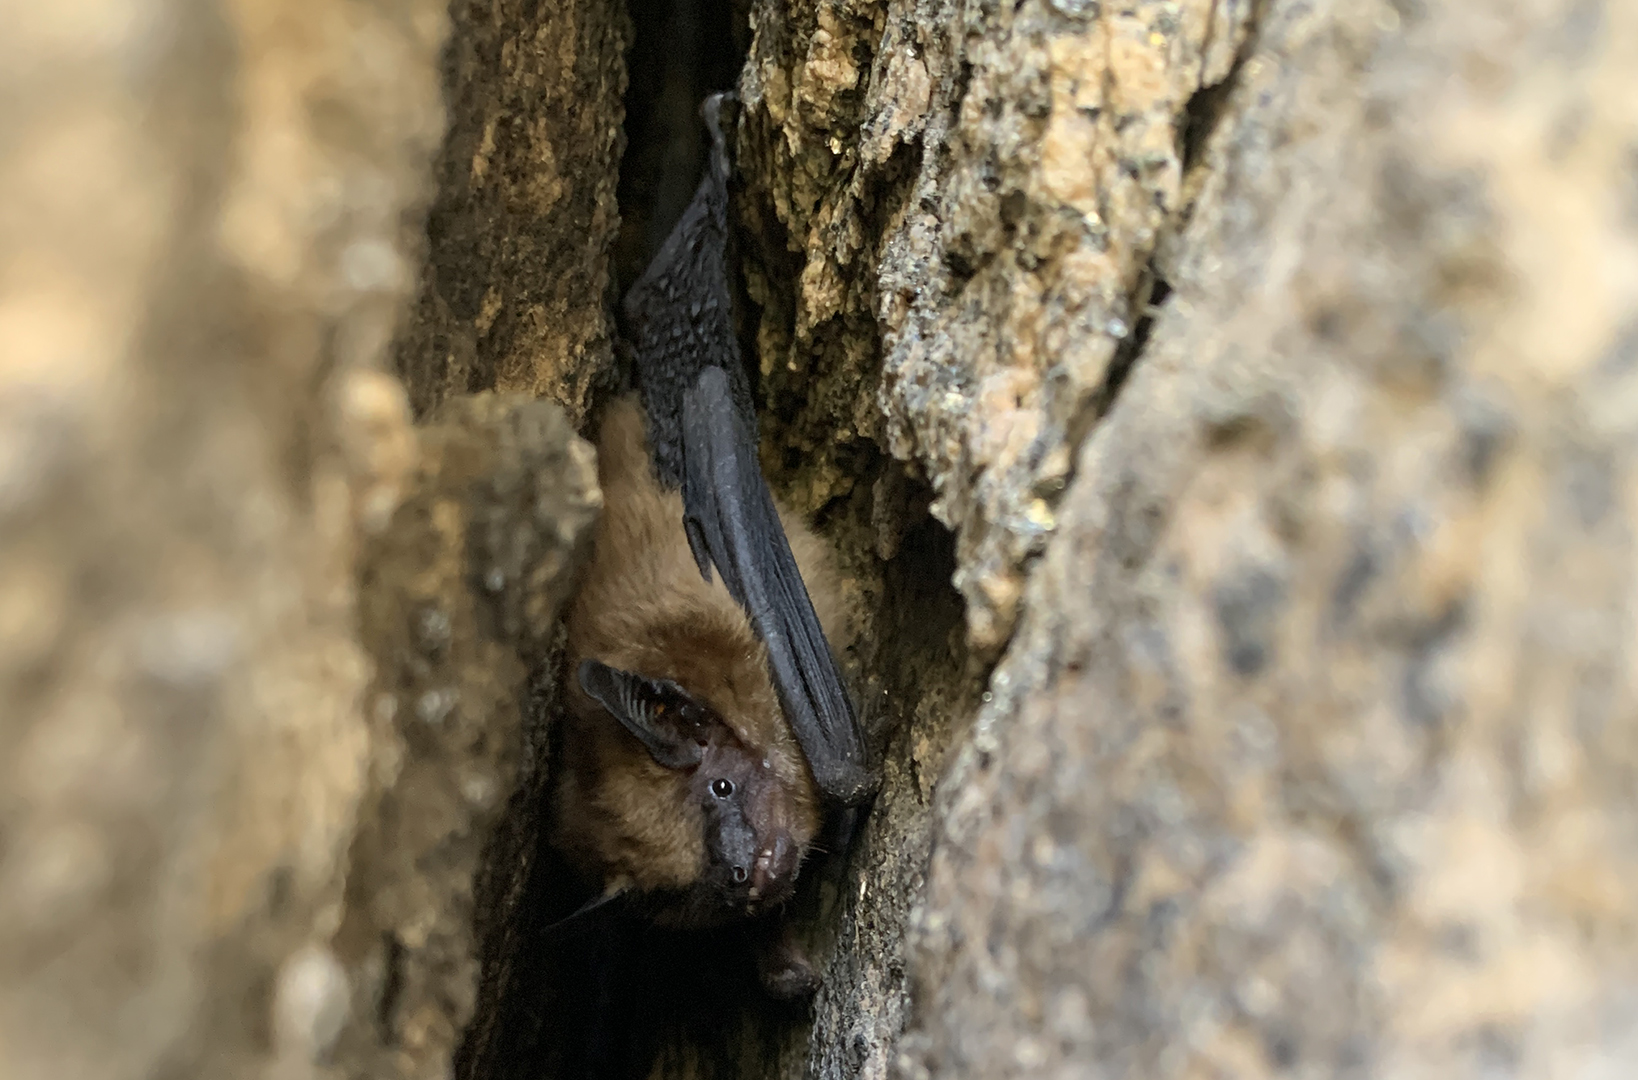 Big brown bat (Eptesicus fuscus) in rock roost - Photo by Sean Smith/NPS